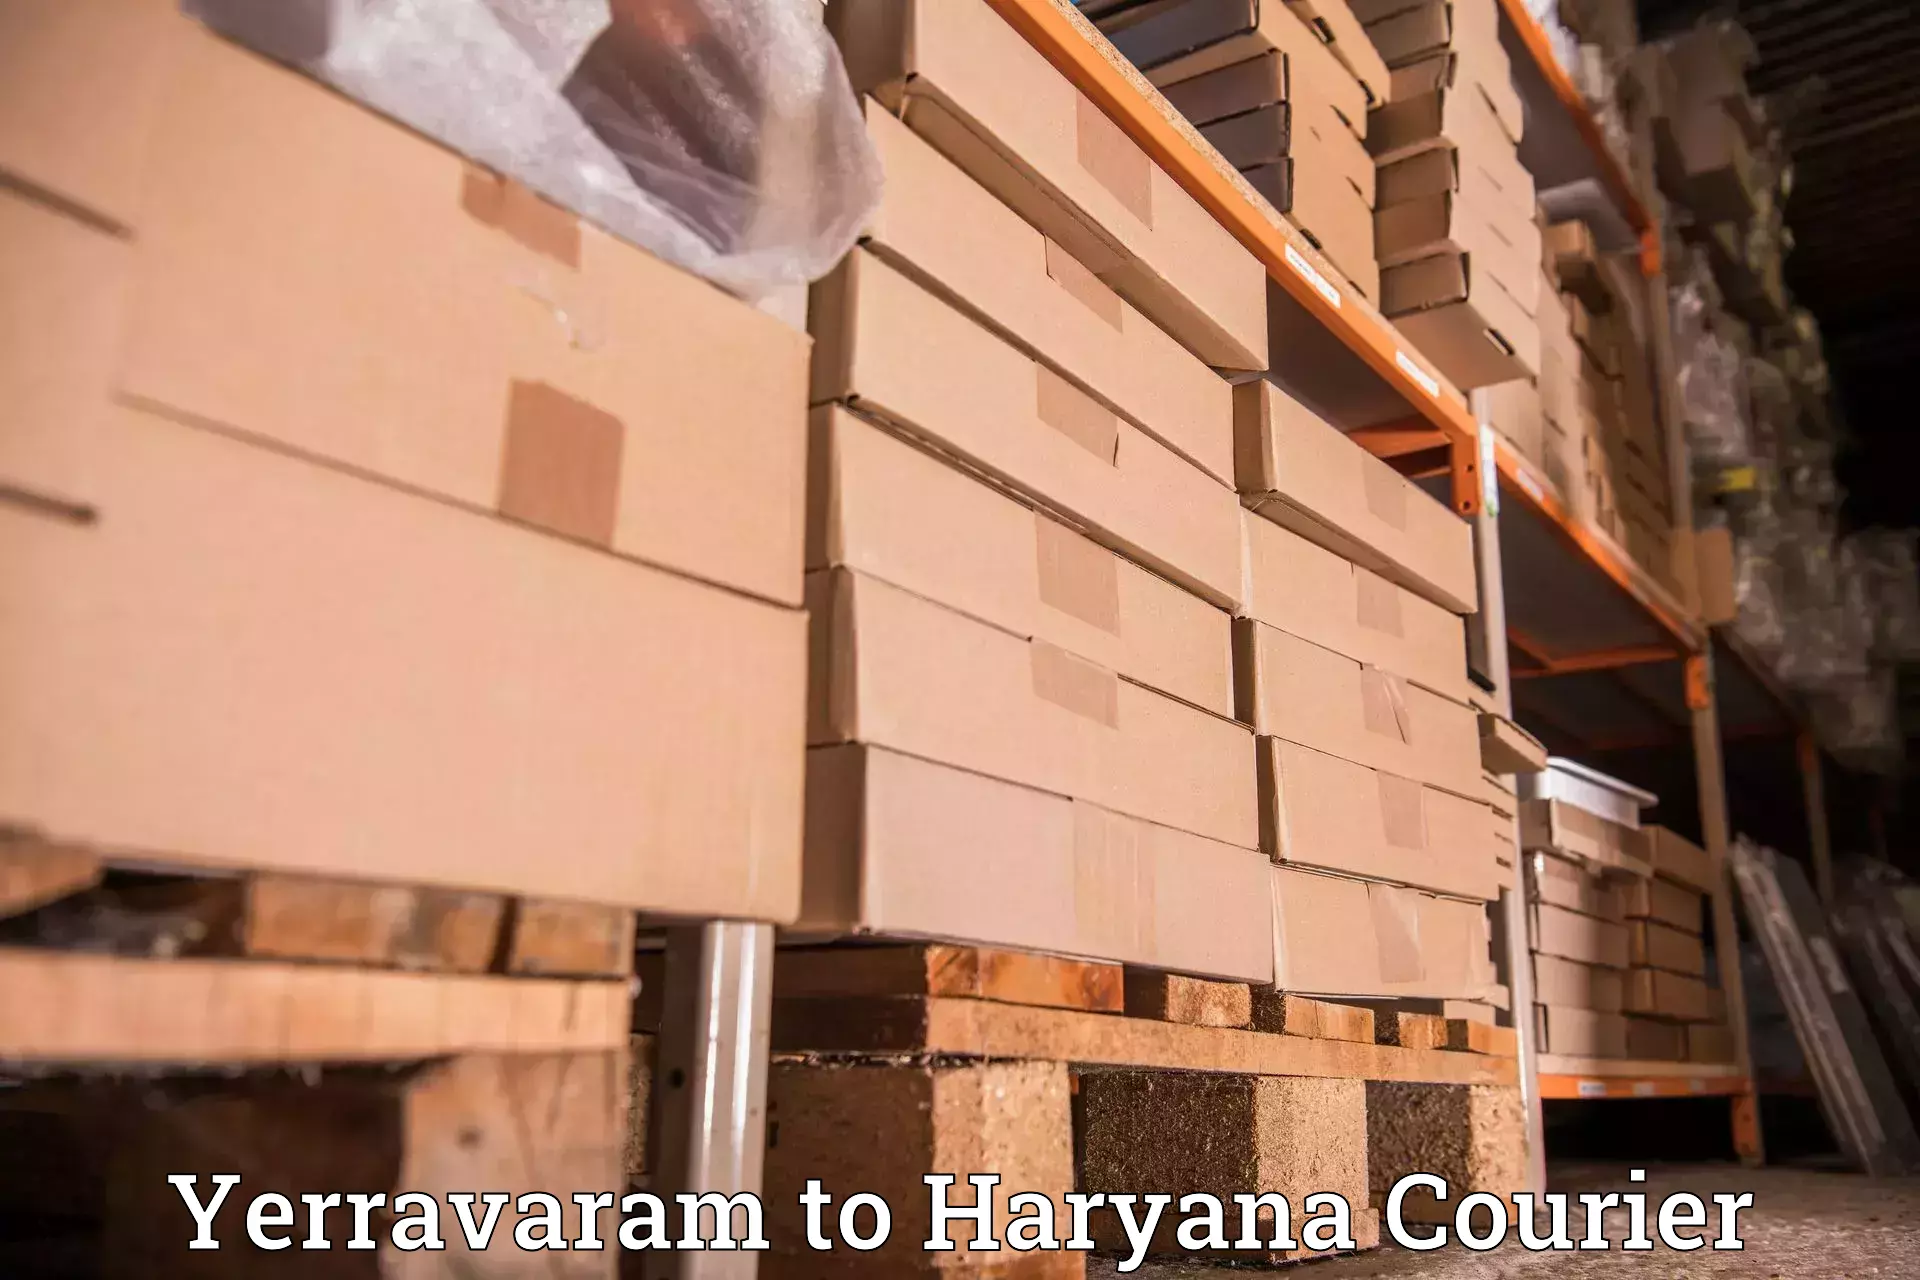 Courier service efficiency in Yerravaram to Chaudhary Charan Singh Haryana Agricultural University Hisar